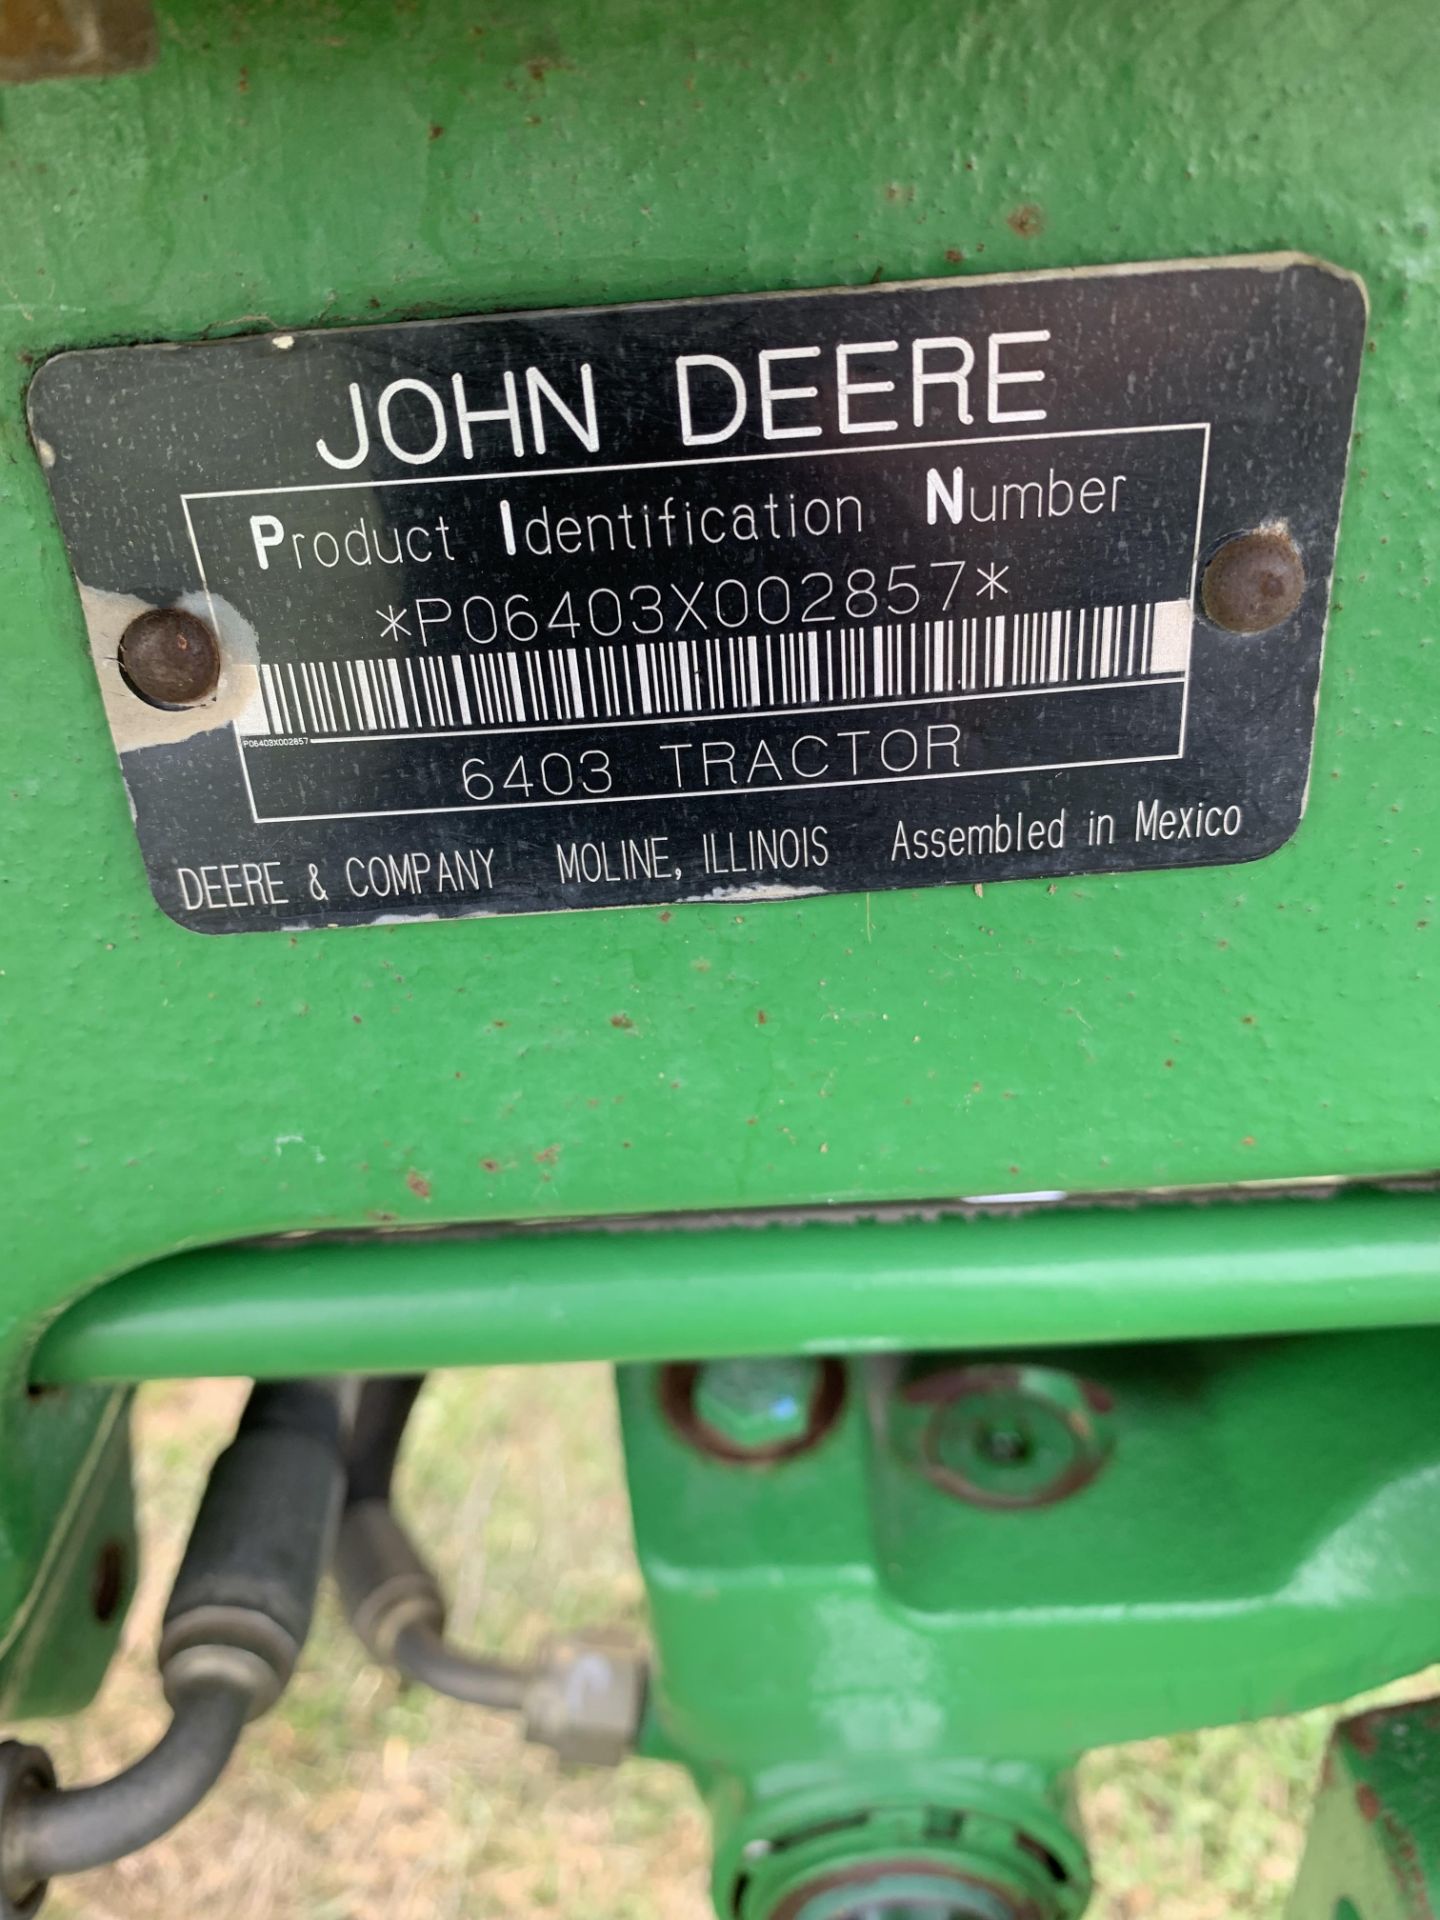 JD 6403 2WD Tractor, ROPS Canopy, 2 HYD. Remotes, 1982 Hrs. Serial # - Bild 4 aus 7